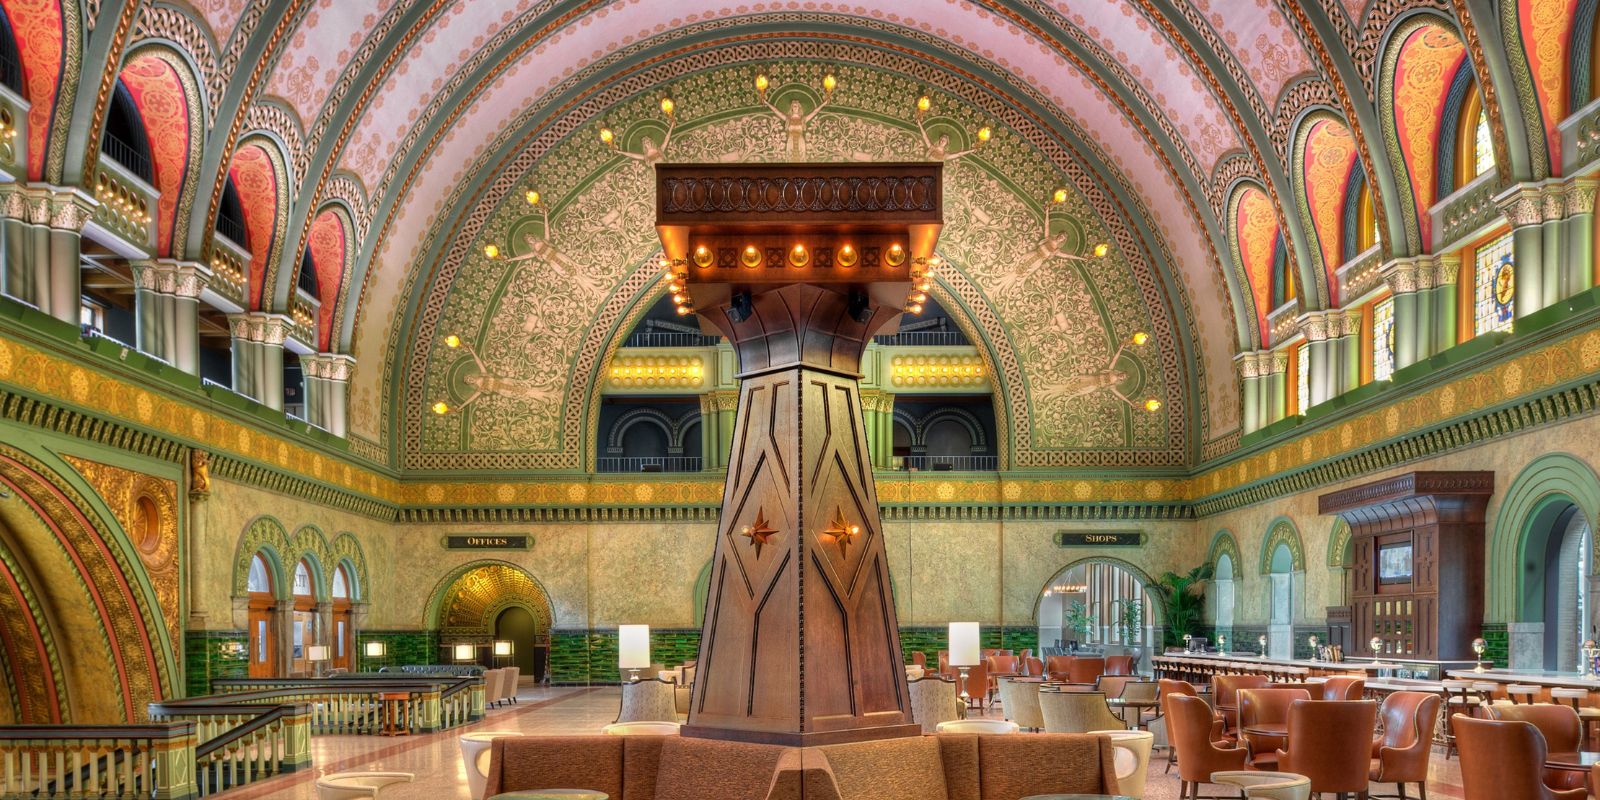 The Grand Hall at St. Louis Union Station features carefully restored architecture of the 19th-century train station.